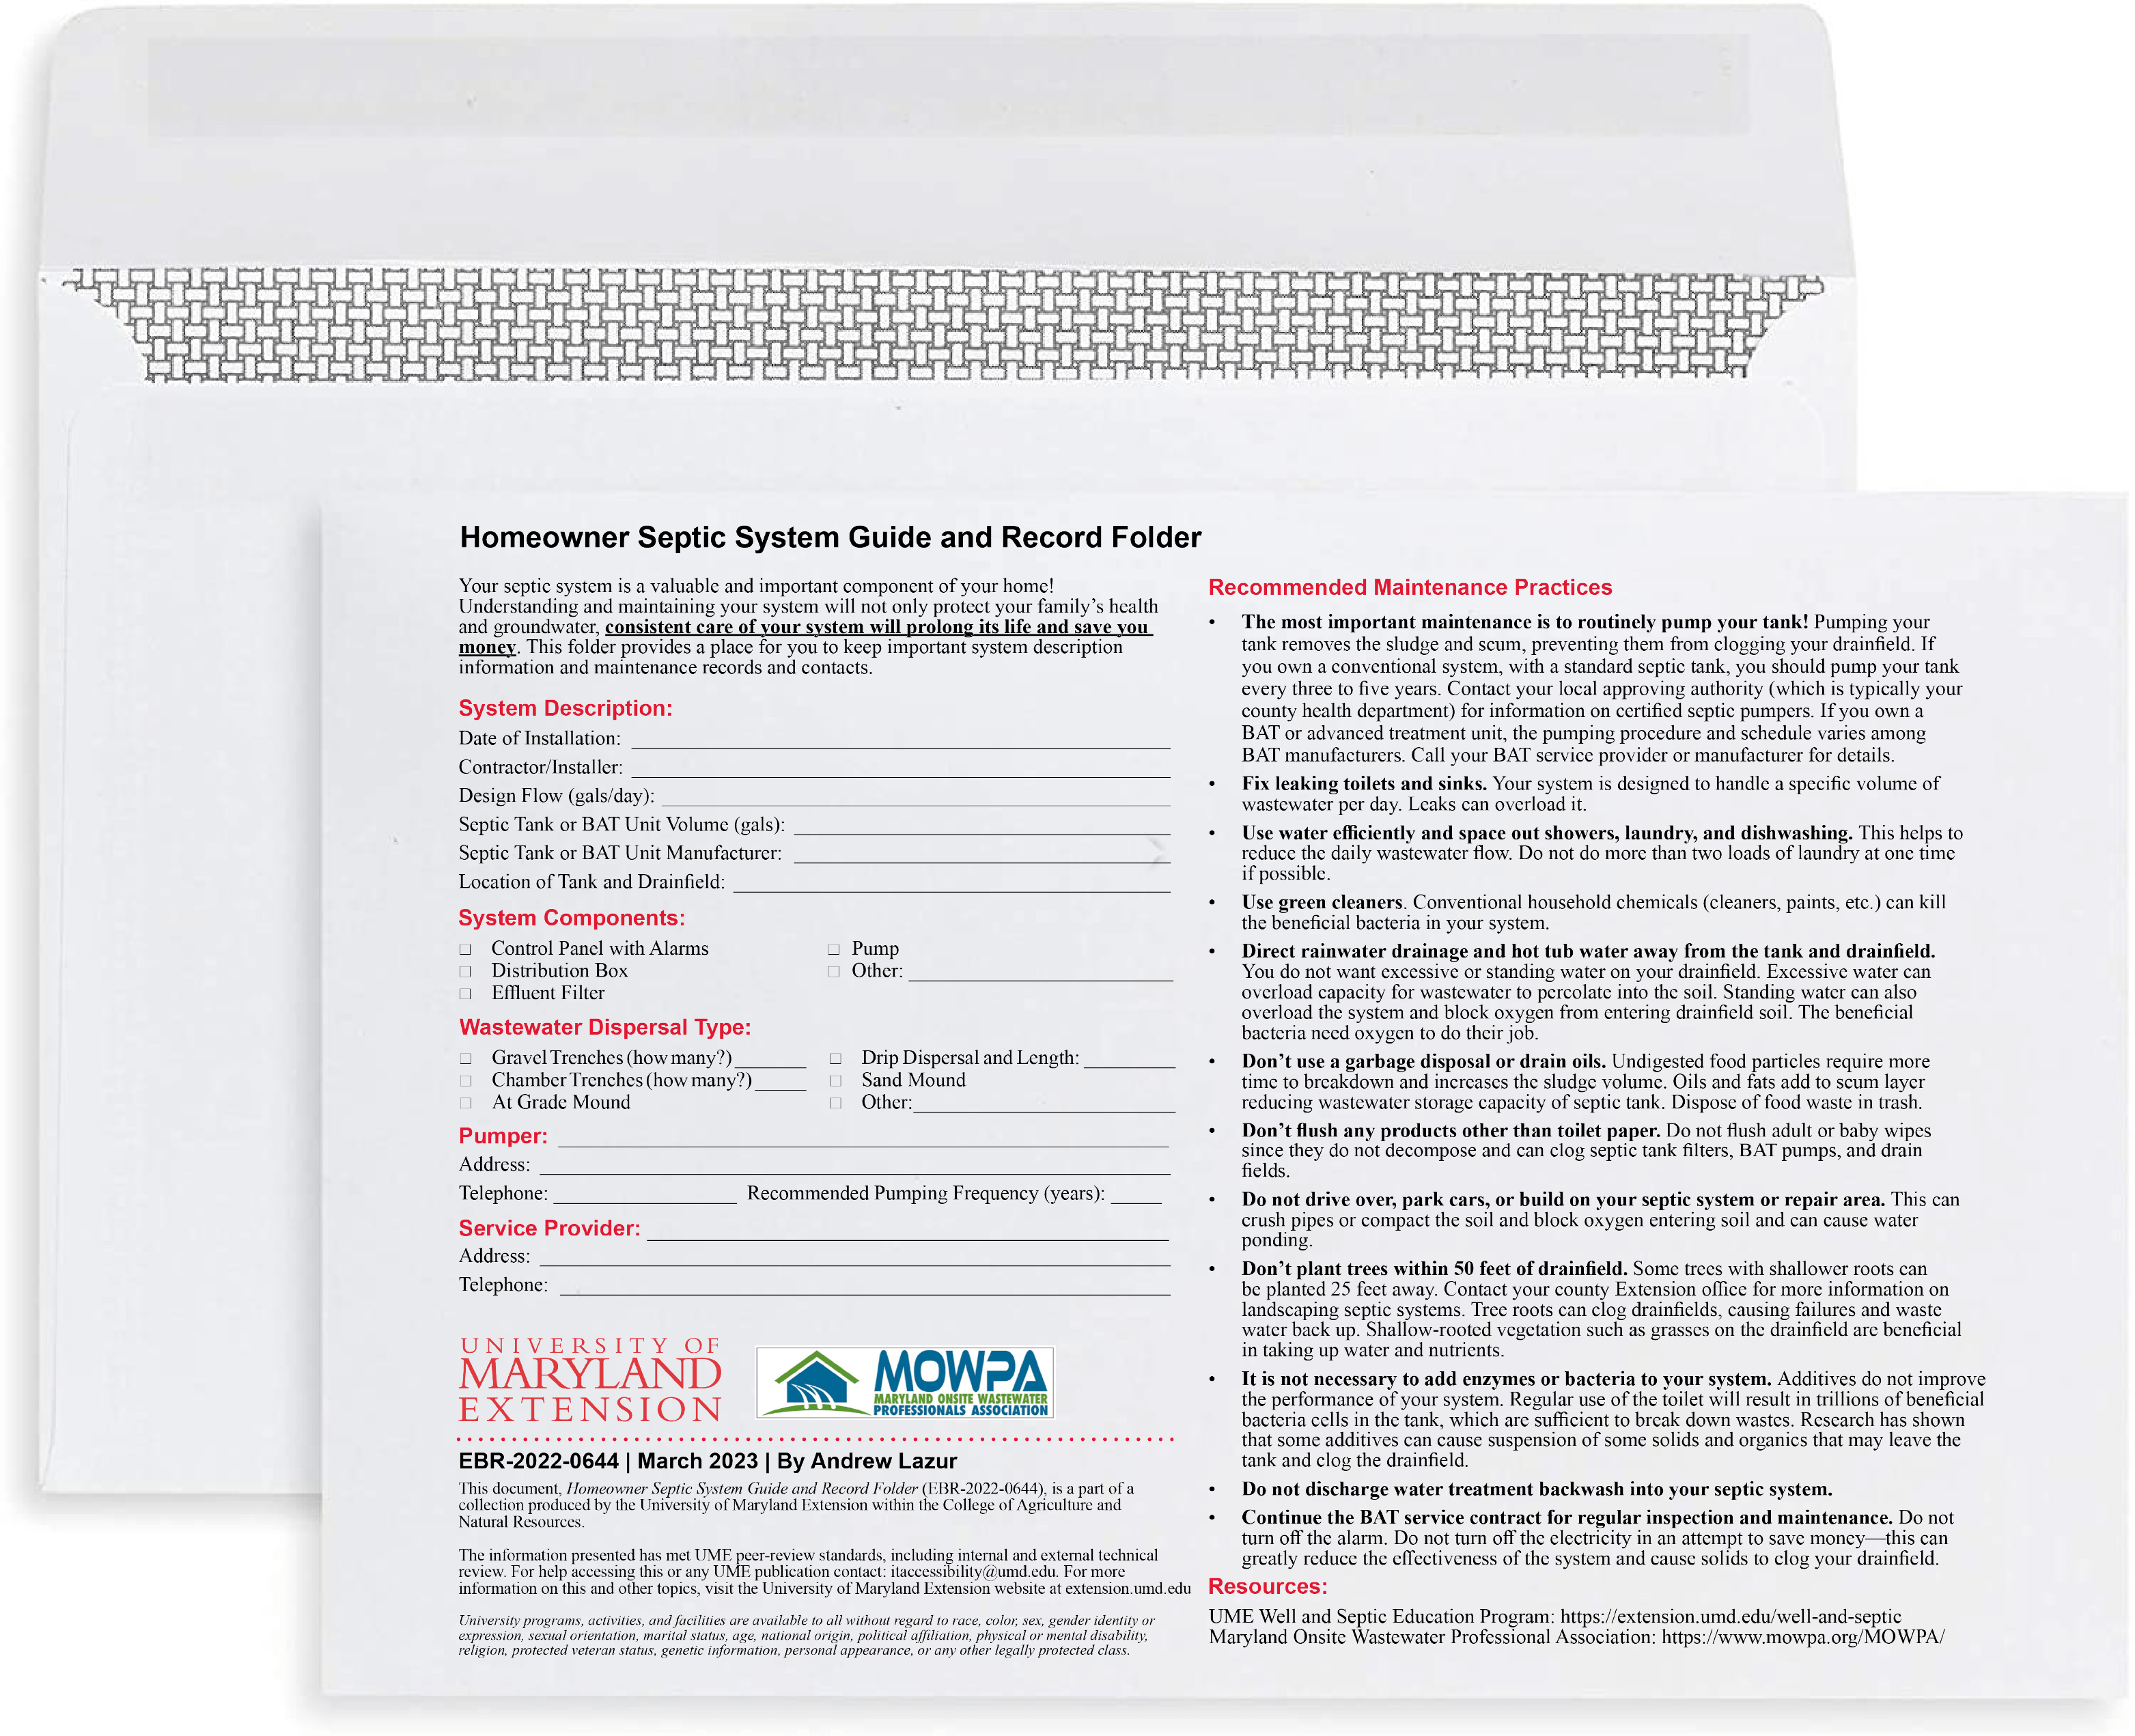 Septic system guide on a 9 x 12 envelope.